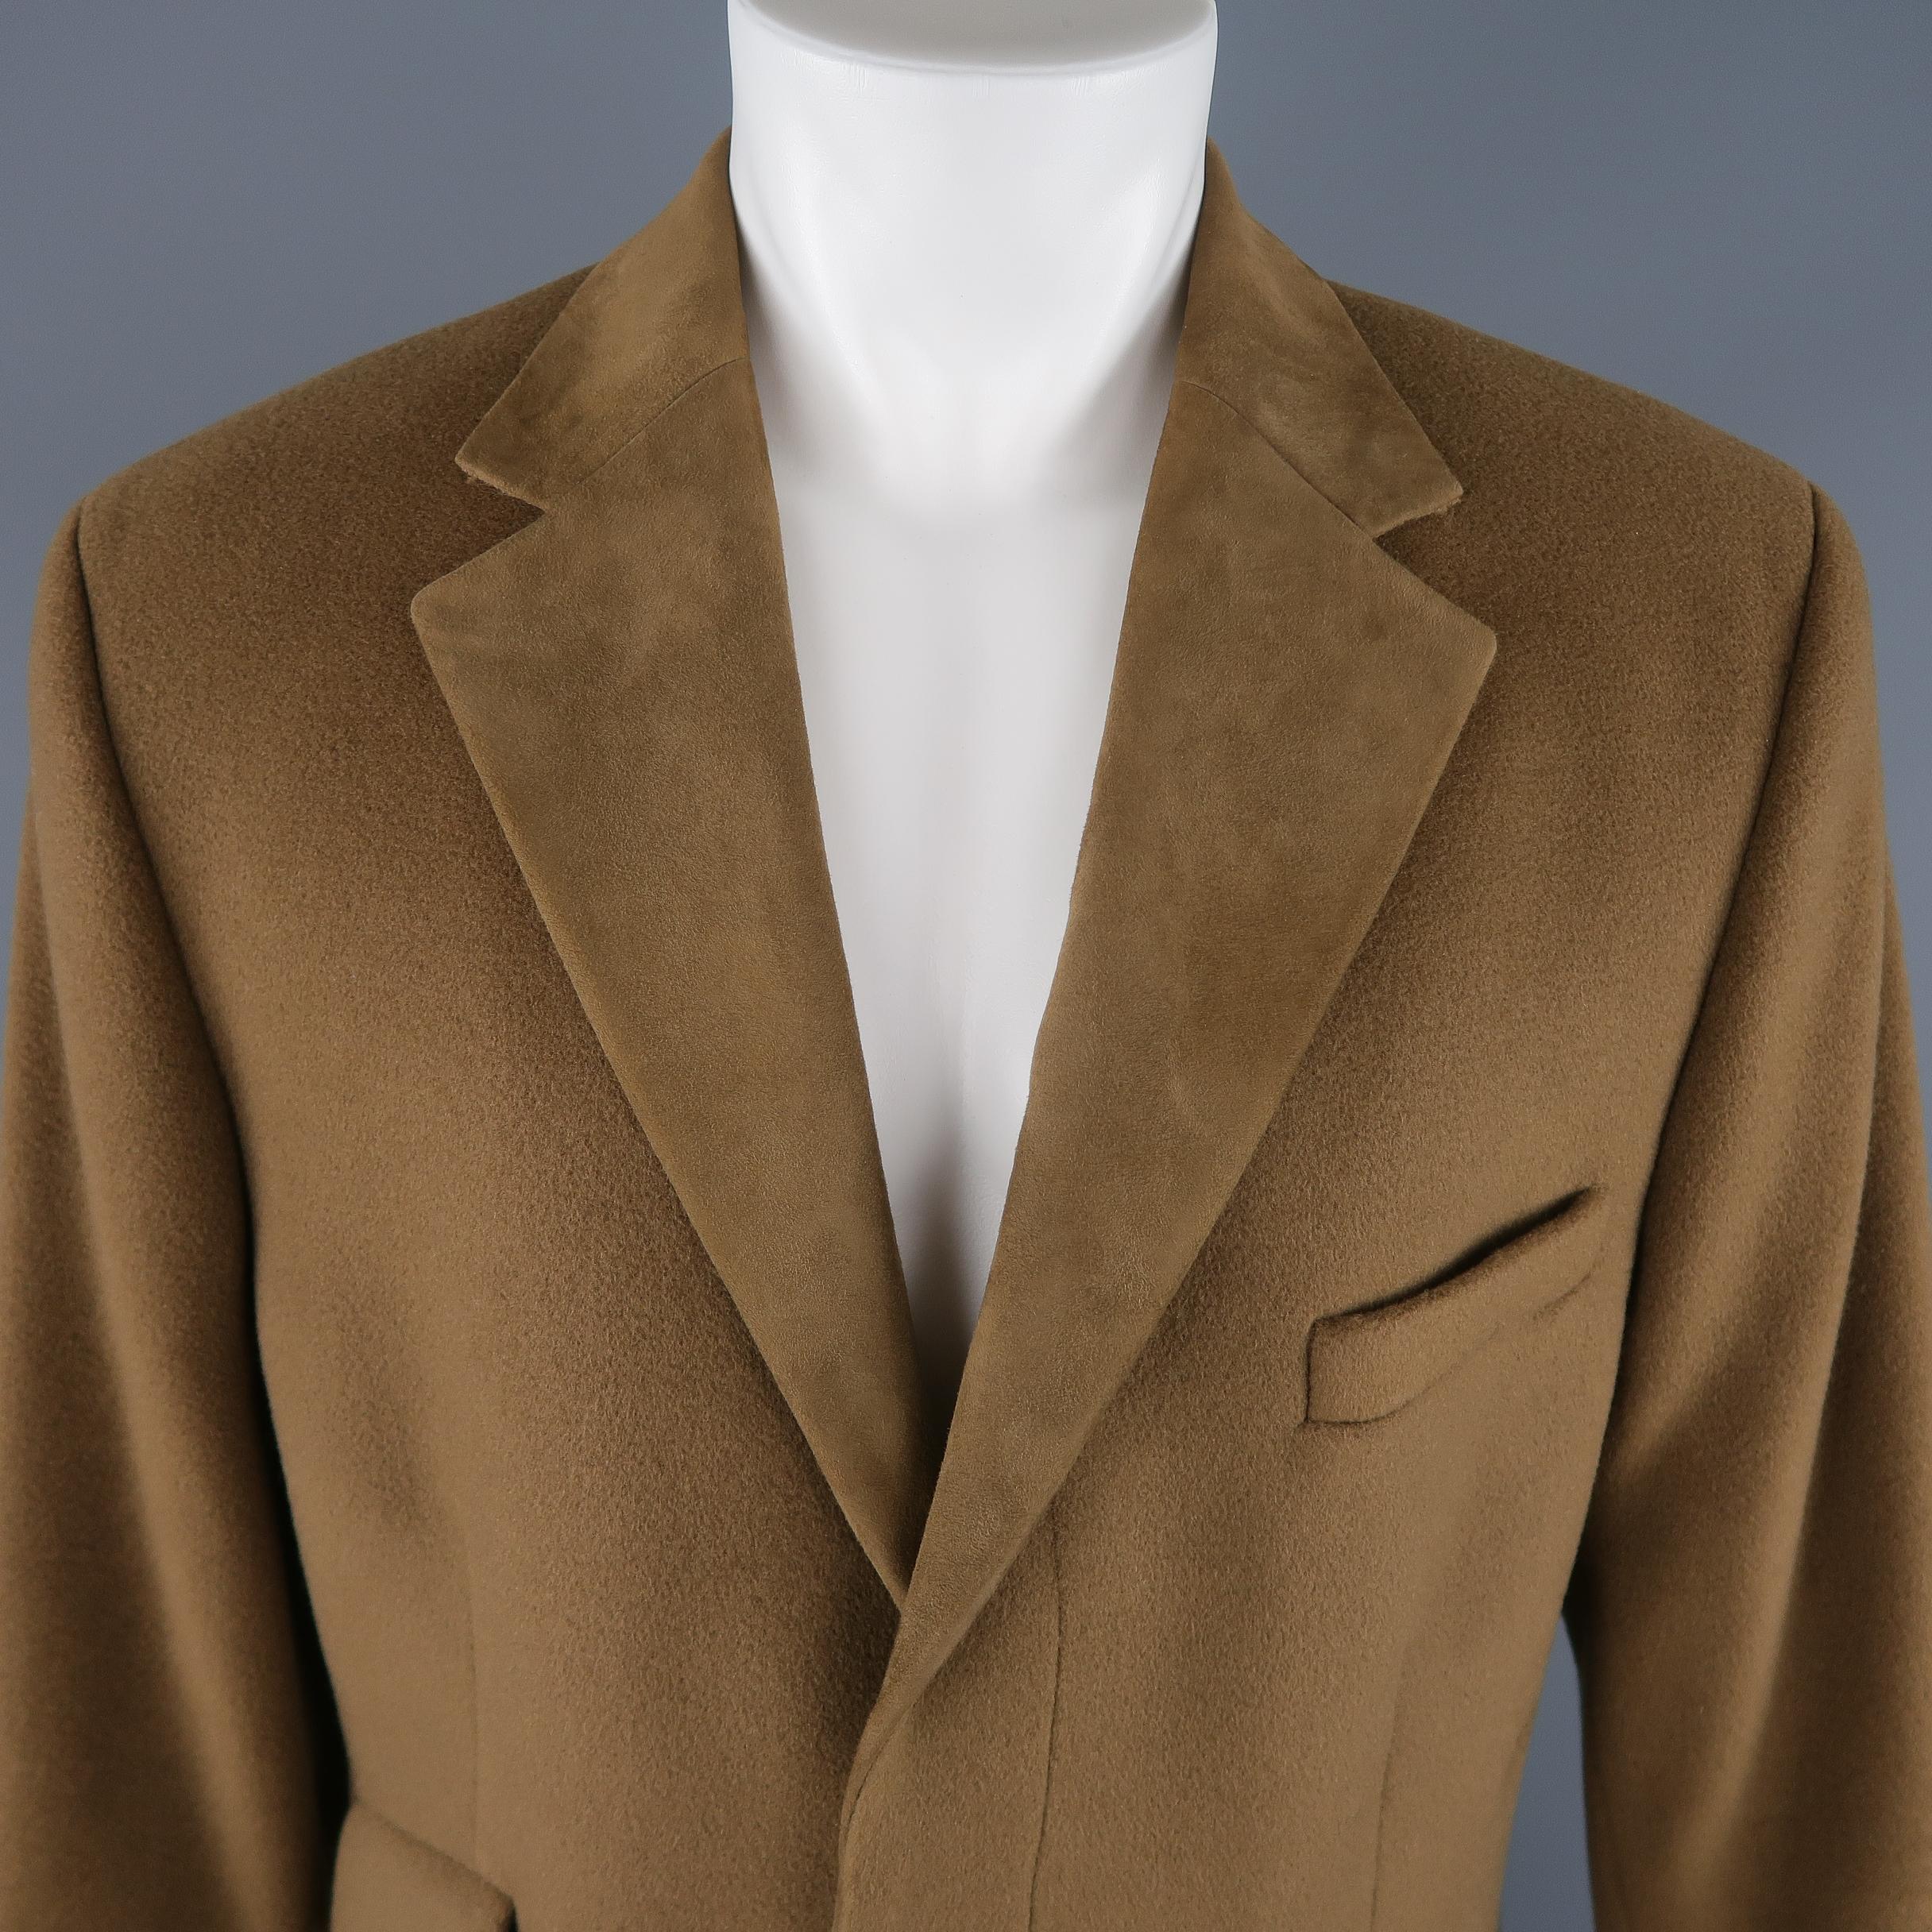 Vintage GIANNI VERSACE over coat comes in light olive green wool with a hidden placket button up closure, triple mock flap pockets, and suede notch lapel. 

Made in Italy. 
Excellent Pre-Owned Condition.
Marked: M
 
Measurements:
 
Shoulder: 18